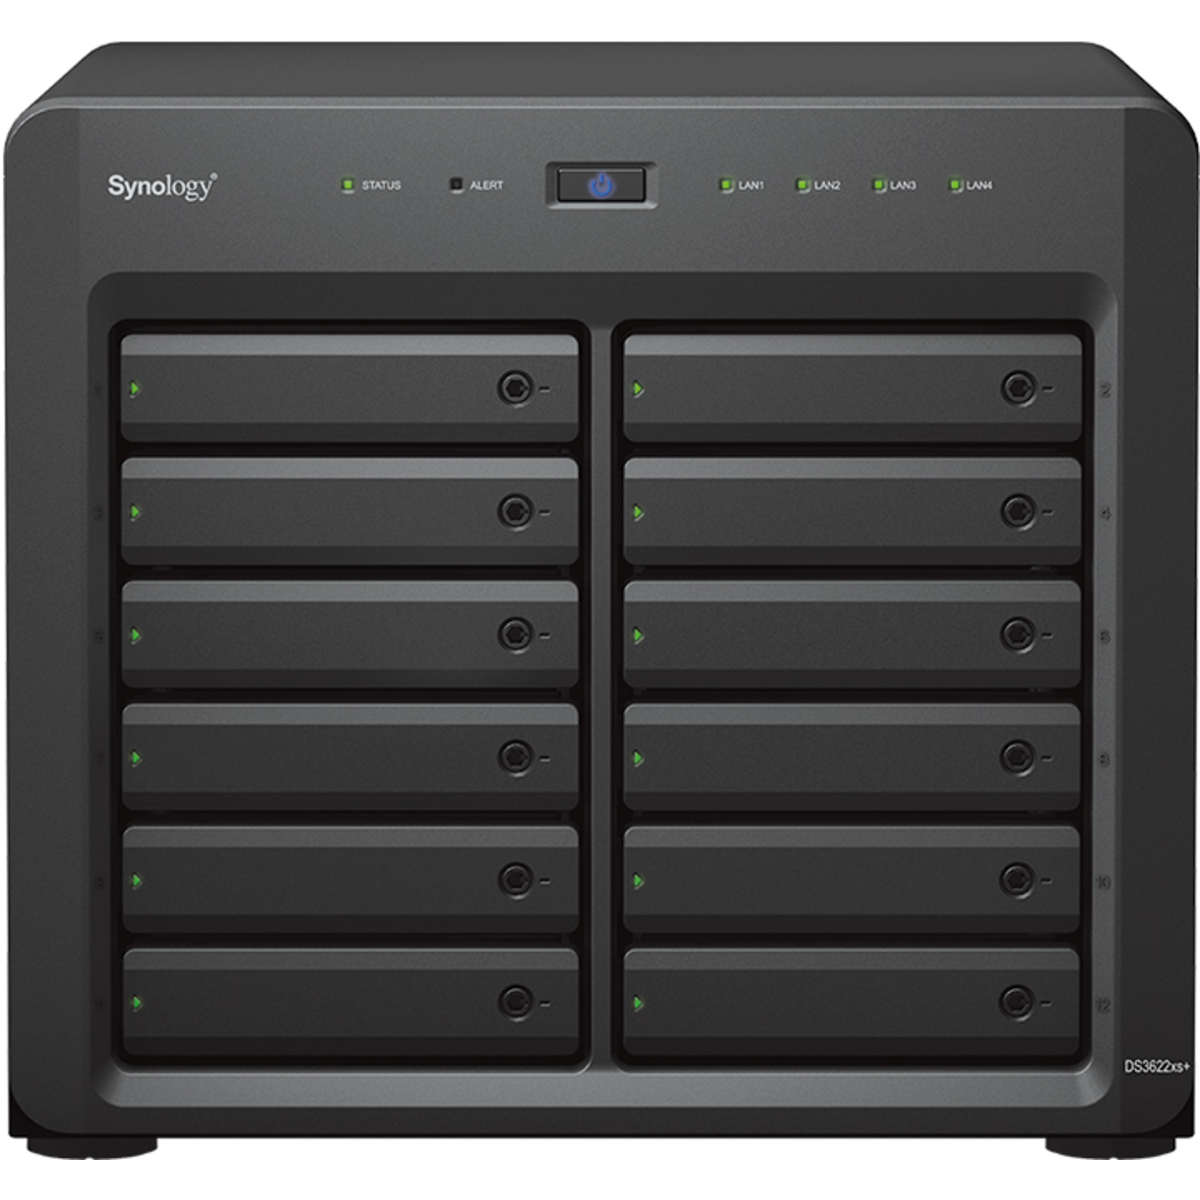 Synology DiskStation DS3622xs+ 72tb 12-Bay Desktop Multimedia / Power User / Business NAS - Network Attached Storage Device 9x8tb Western Digital Red Pro WD8005FFBX 3.5 7200rpm SATA 6Gb/s HDD NAS Class Drives Installed - Burn-In Tested DiskStation DS3622xs+